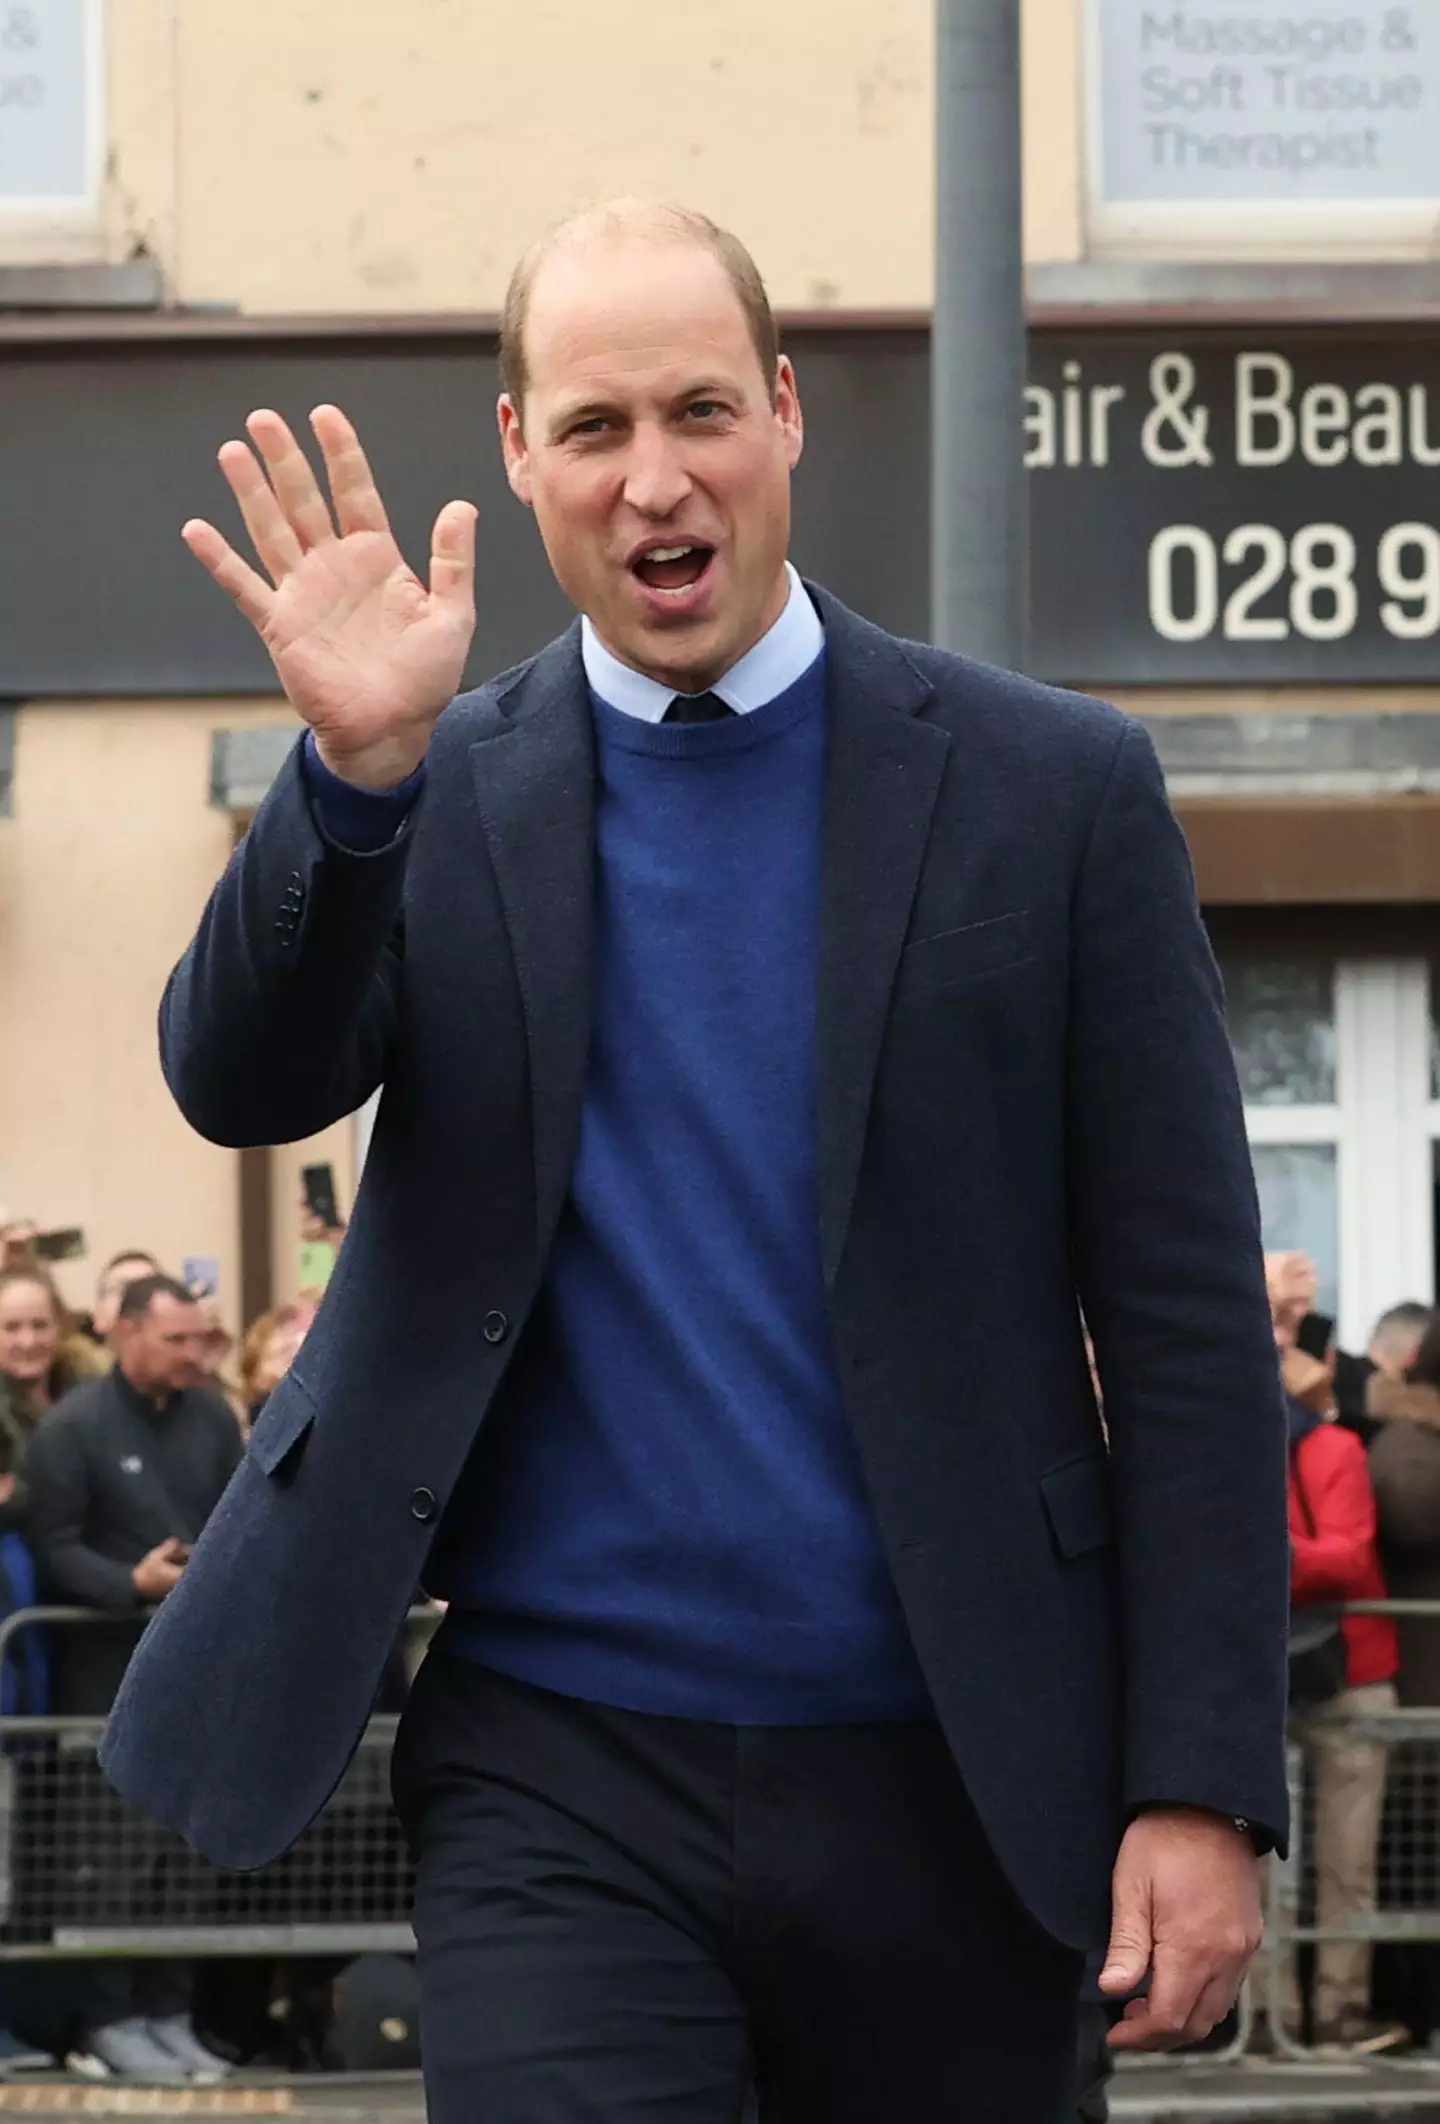 Prince William has been dethroned as the 'world's hottest bald man'.